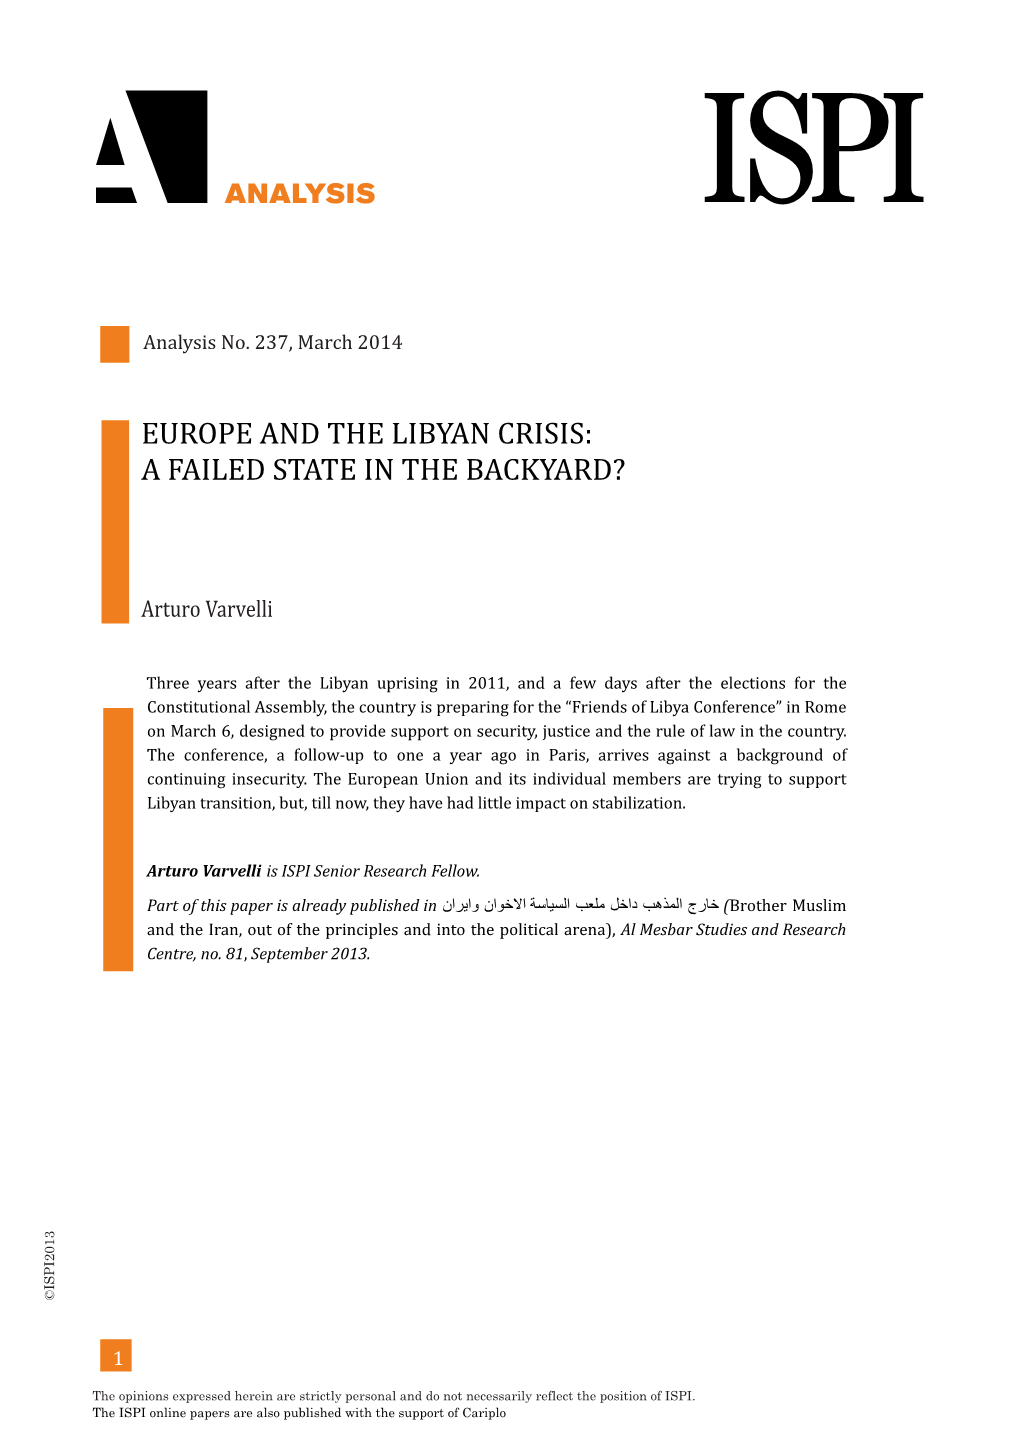 Europe and the Libyan Crisis: a Failed State in The